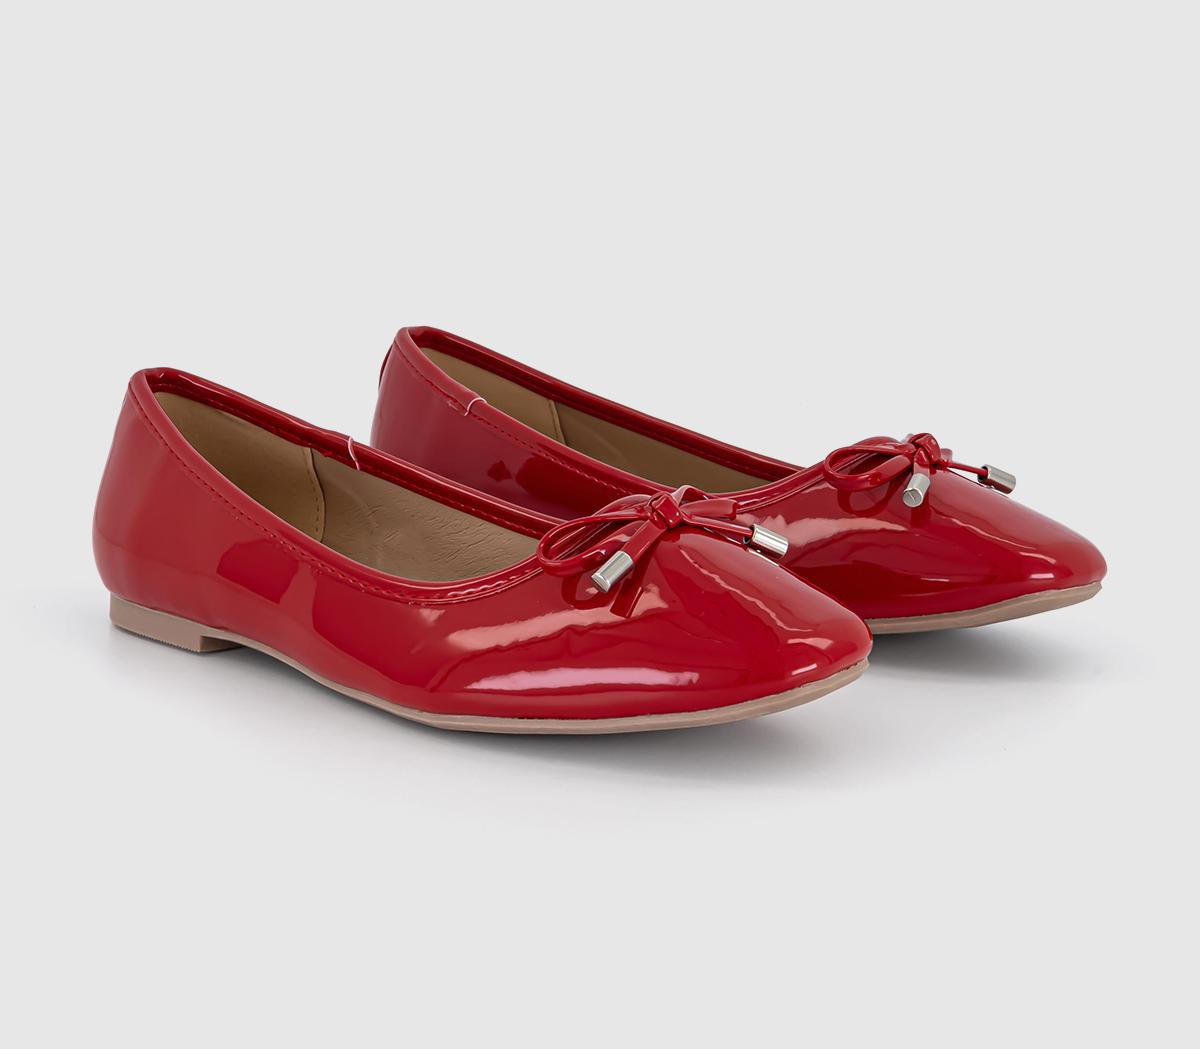 OFFICE Womens Flora Bow Detail Ballet Pumps Red Patent, 3